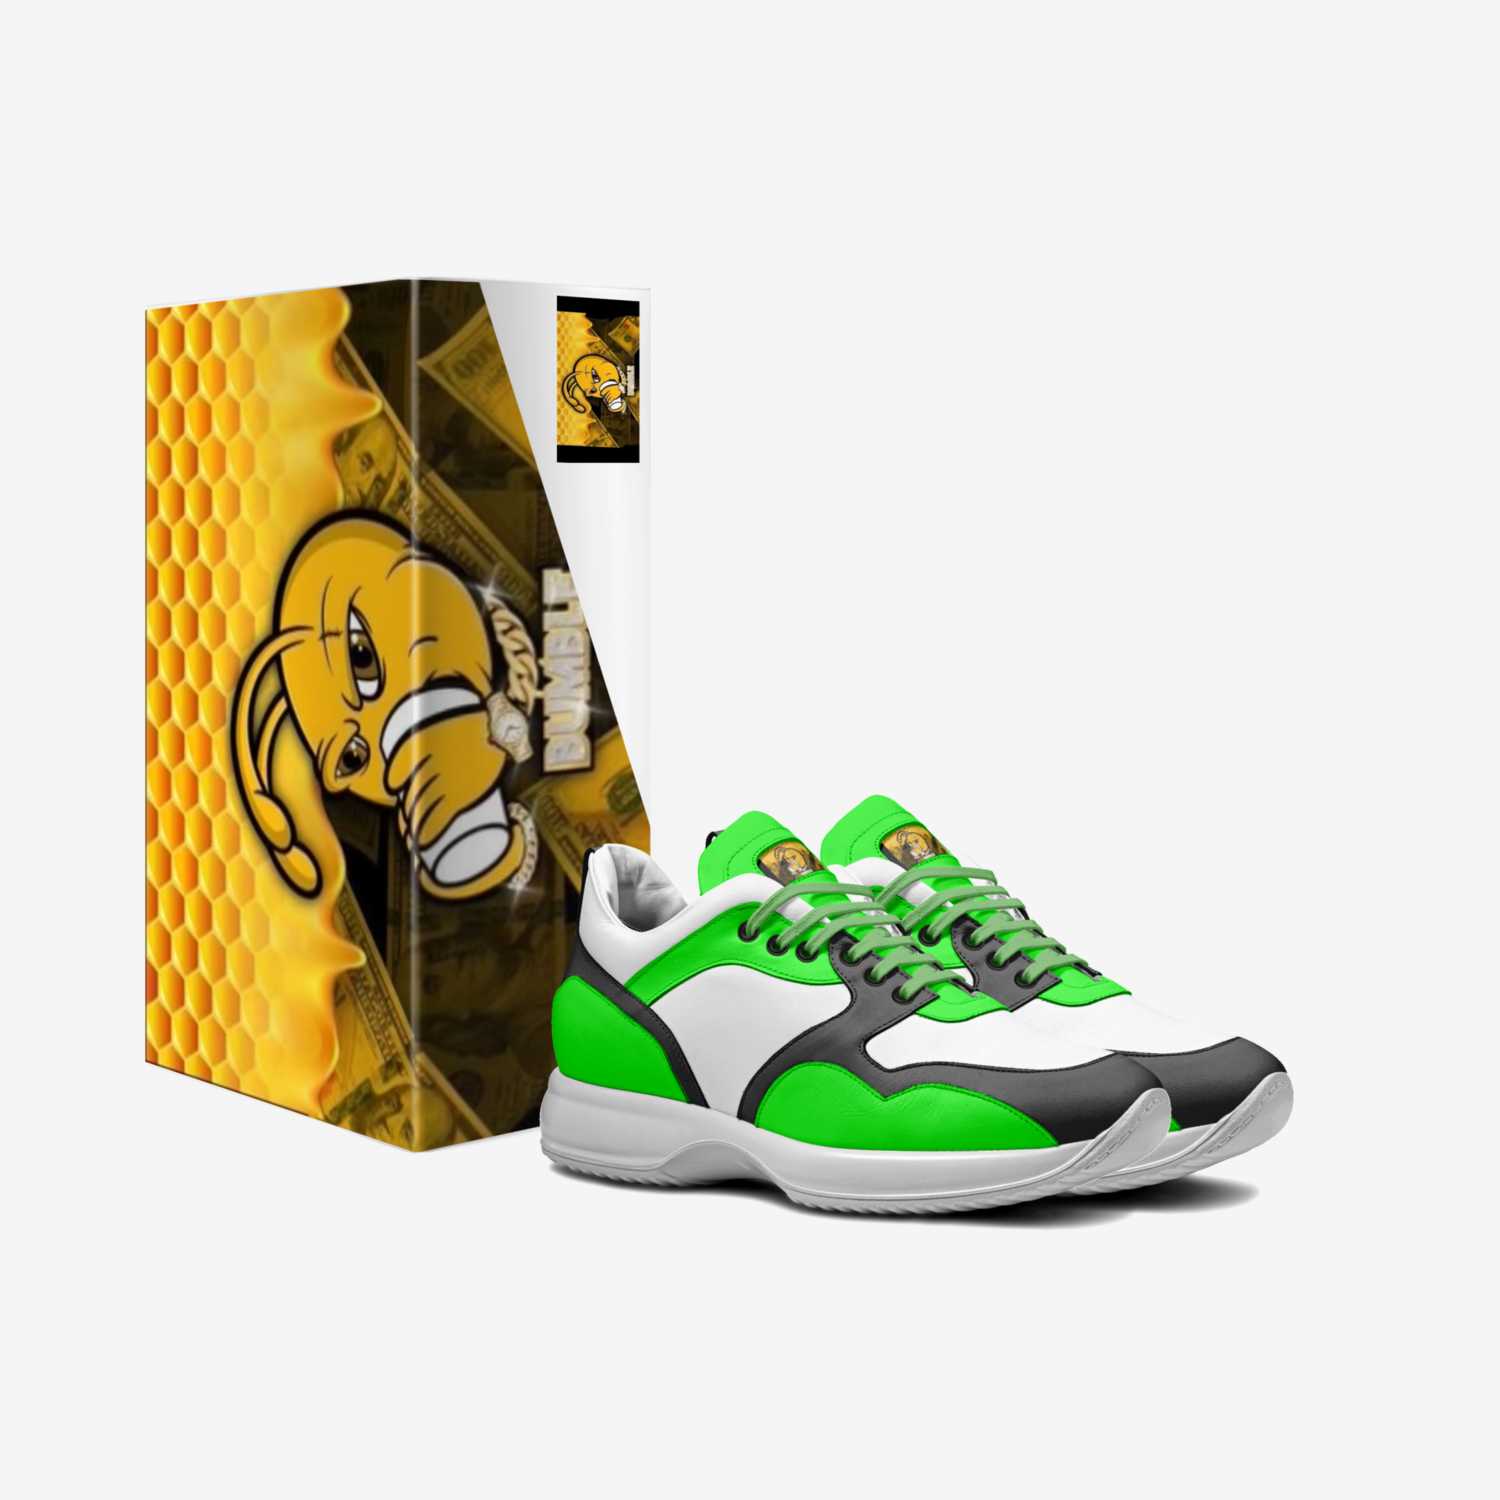 bumblez custom made in Italy shoes by Brandon Matthews | Box view